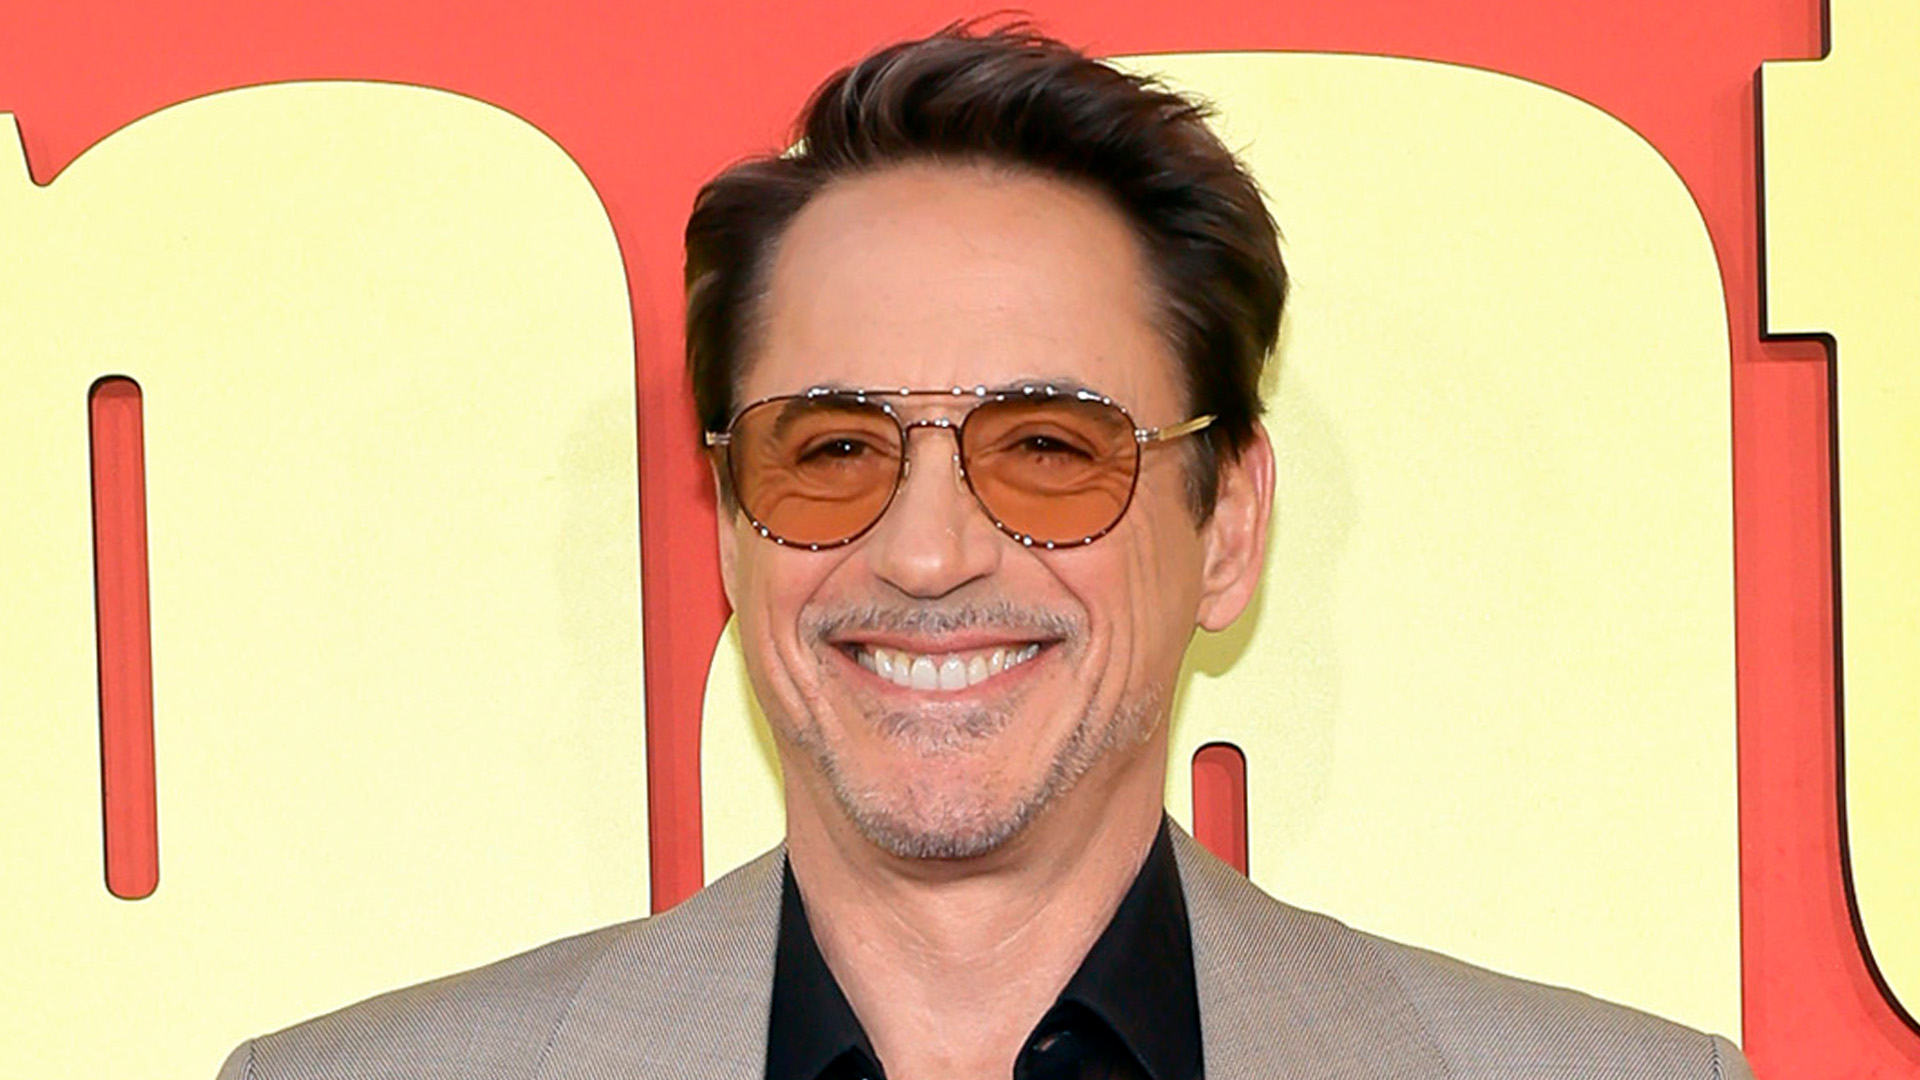 Robert Downey Jr rocks high heels on red carpet years after Iron Man – a bold fashion statement!